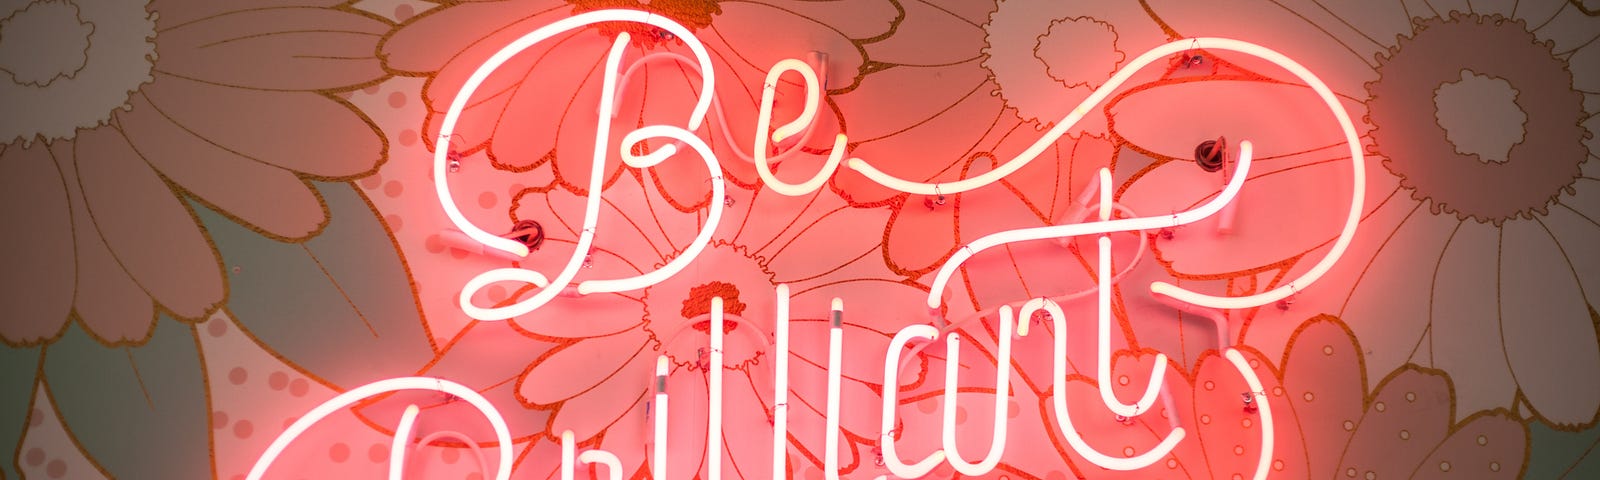 A neon sign saying “be brilliant”